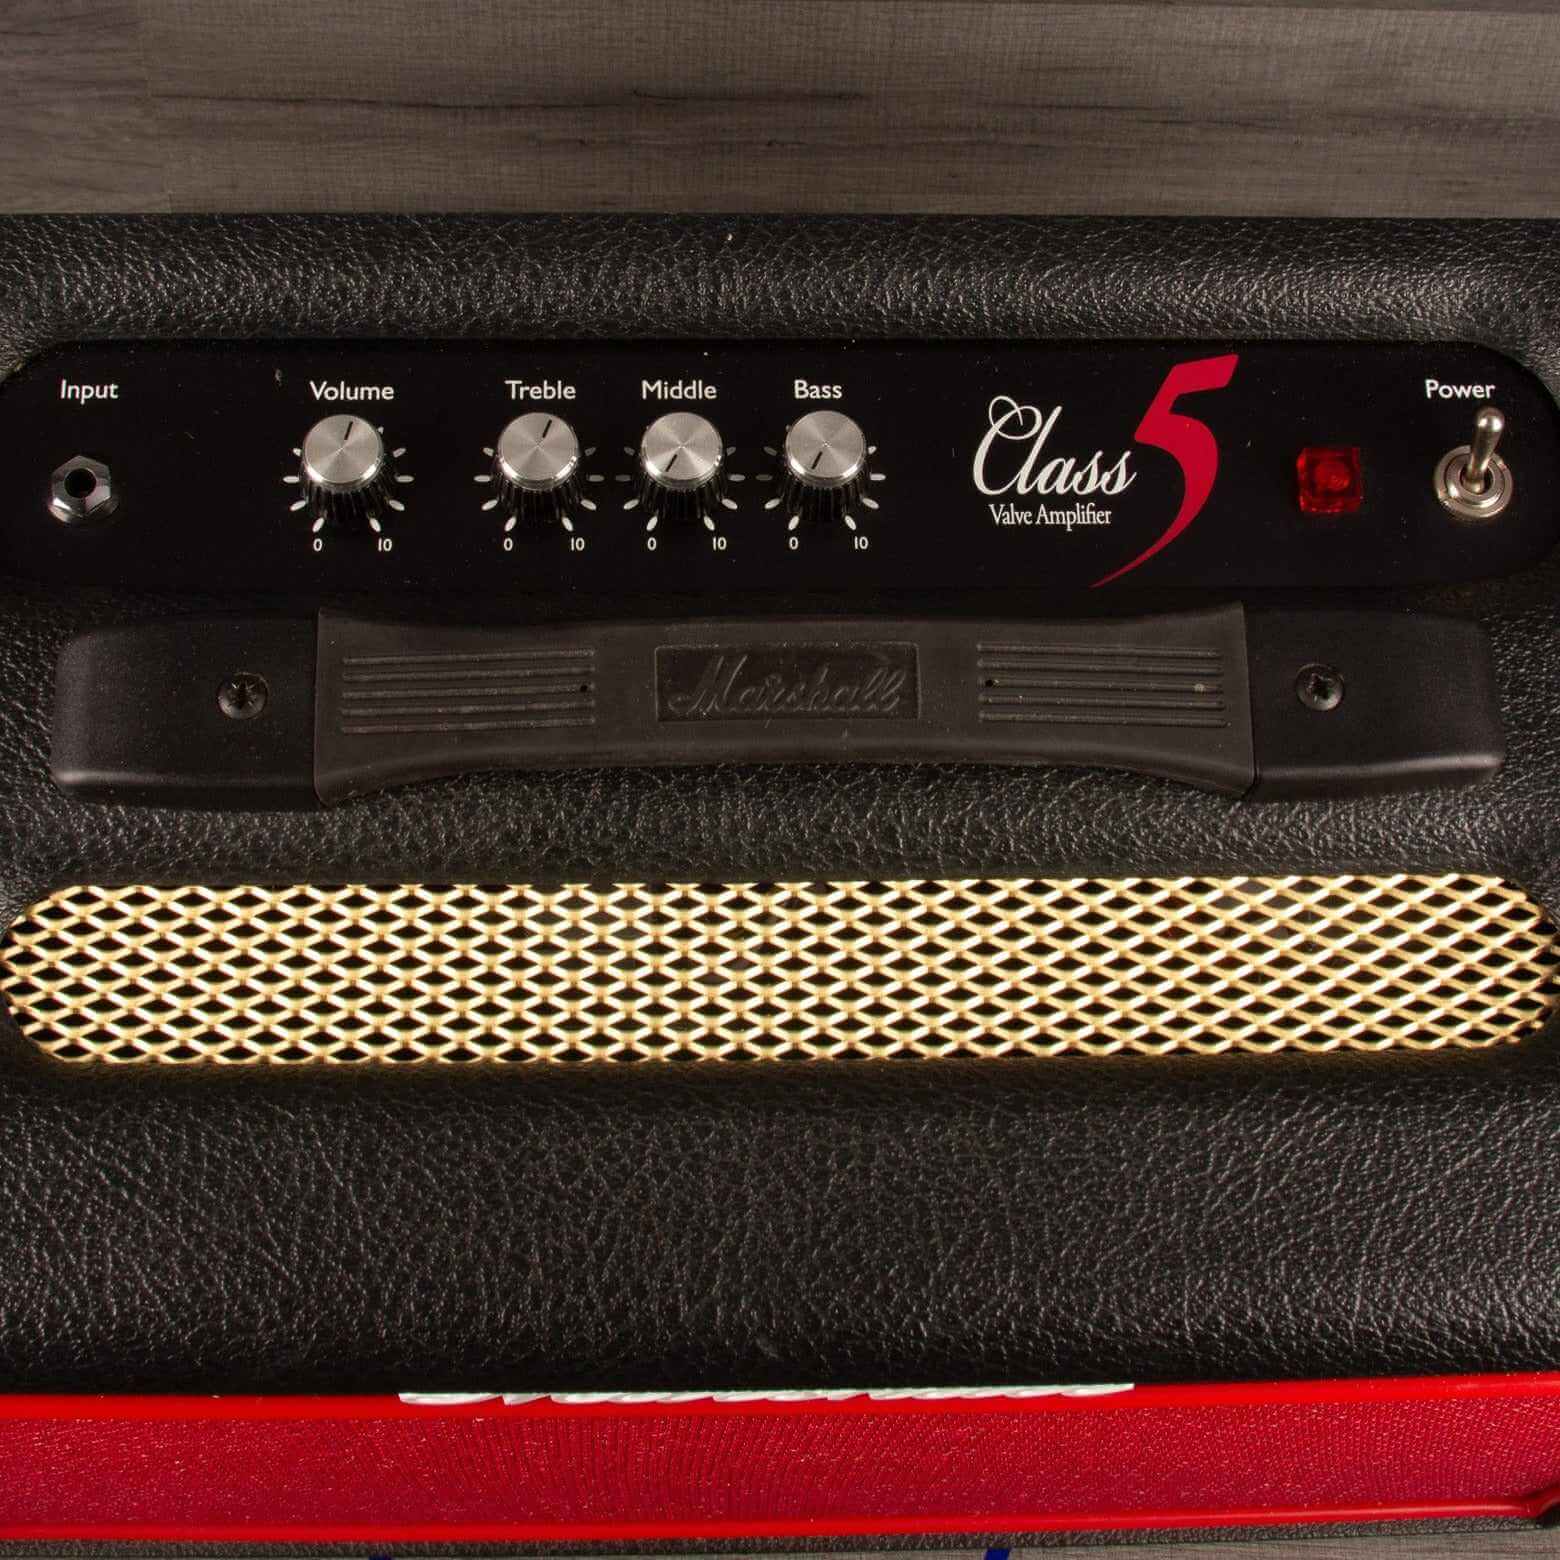 USED - Marshall Class 5 LTD edition Red Roulette Combo